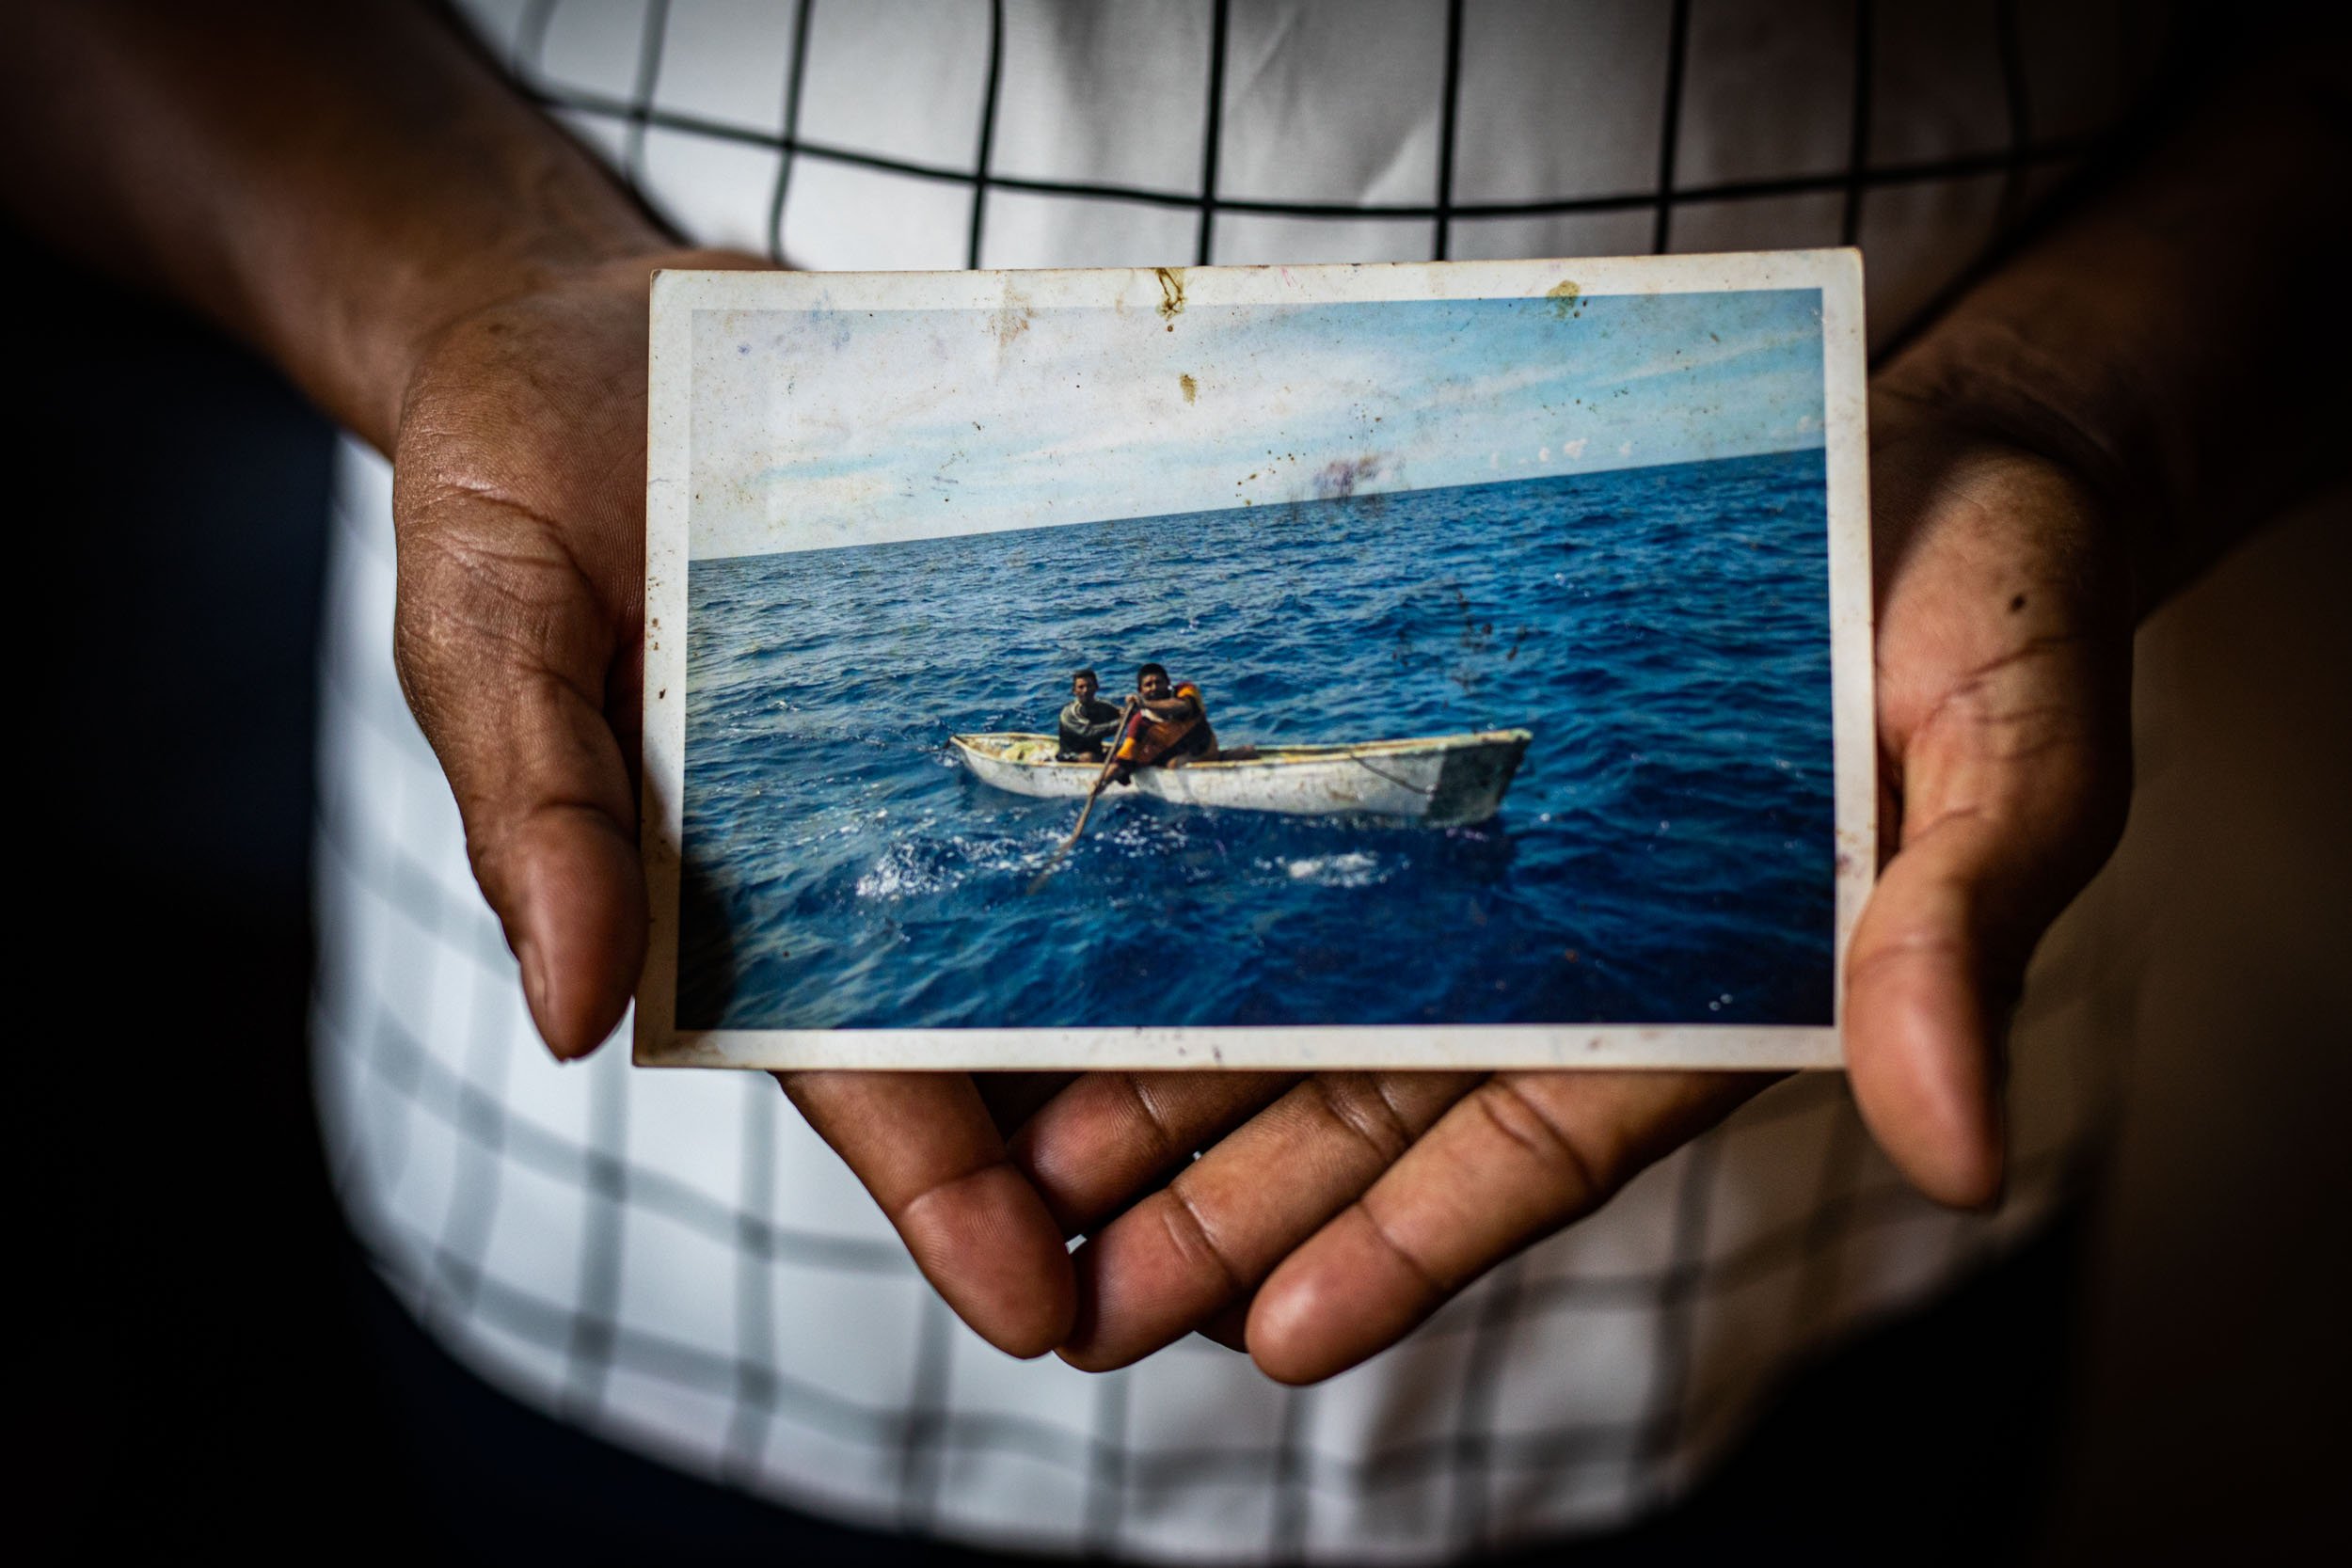  Tania Santos Zelaya, 36, holds a photo of her husband Electerio Santos Zelaya who died due to decompression sickness in December 2018. 